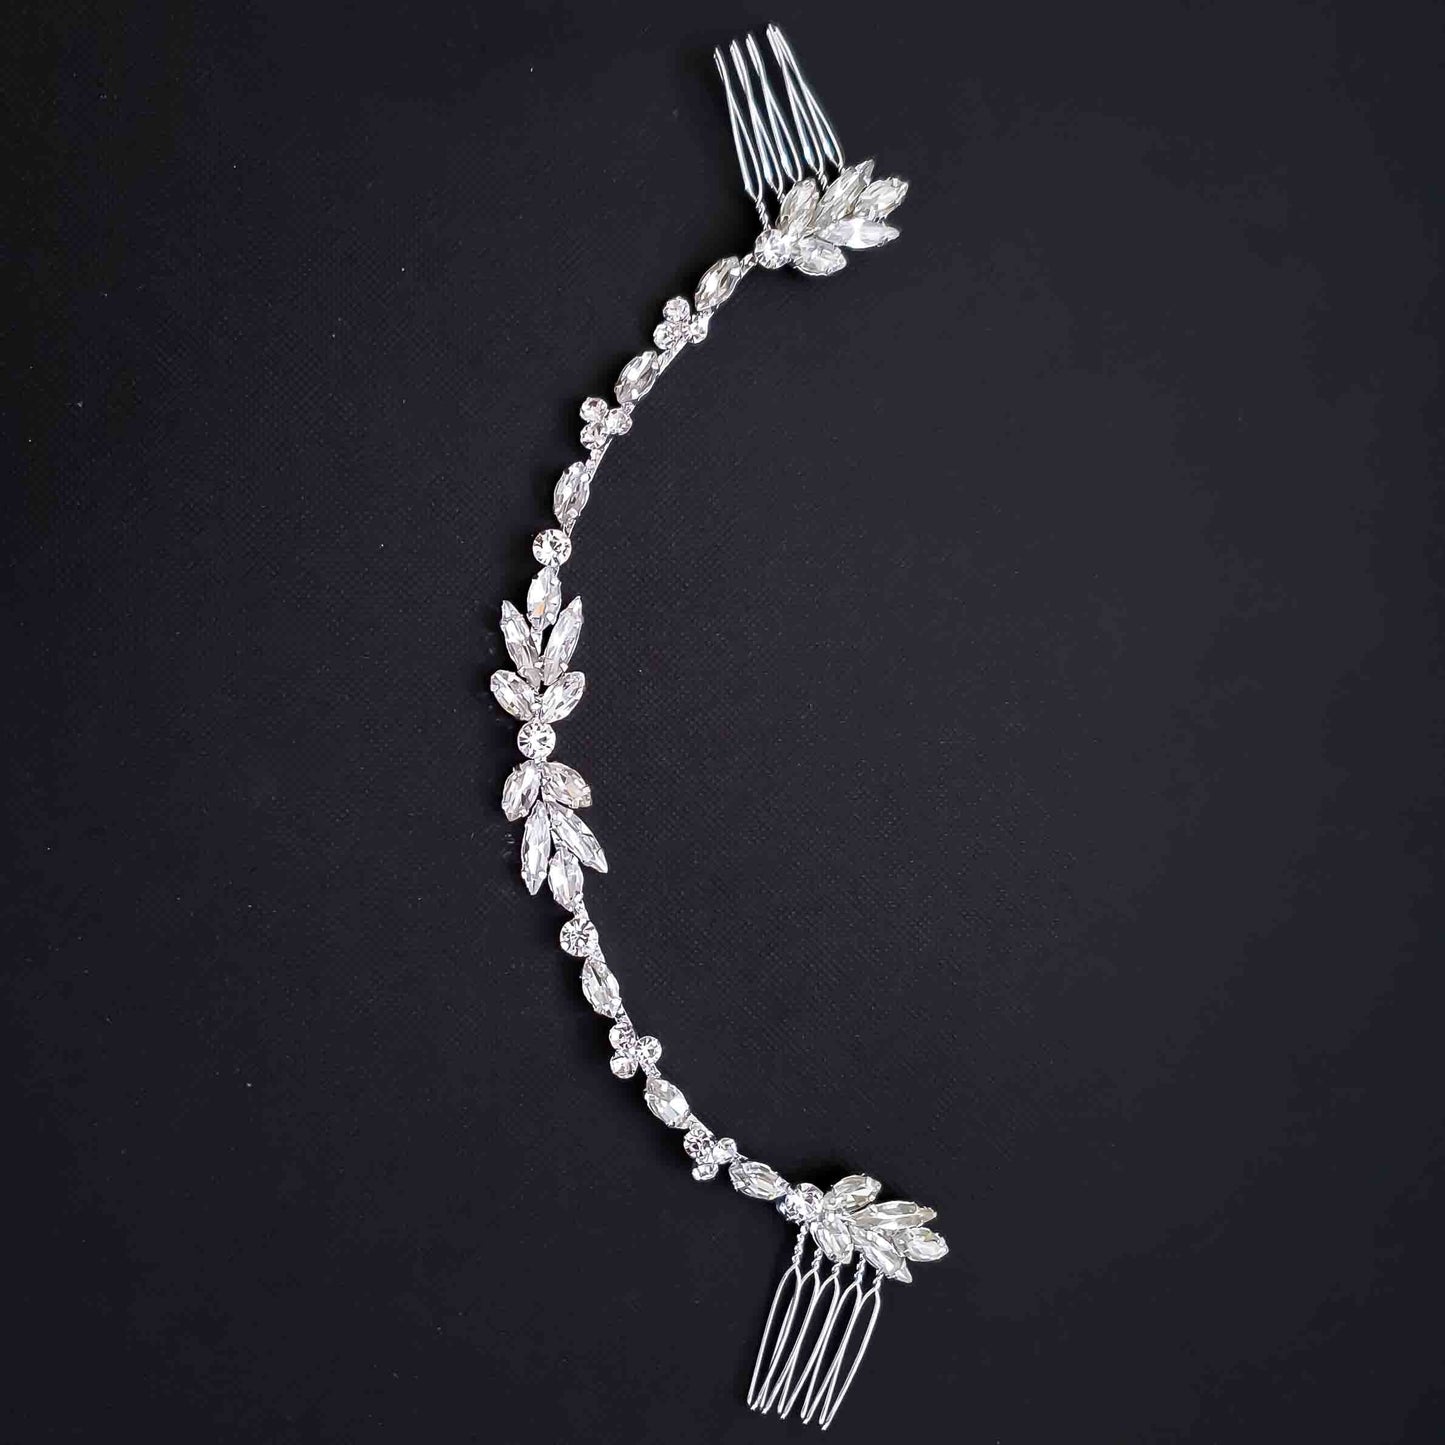 Thin Silver and Crystal Bridal Hairpiece -Haisley